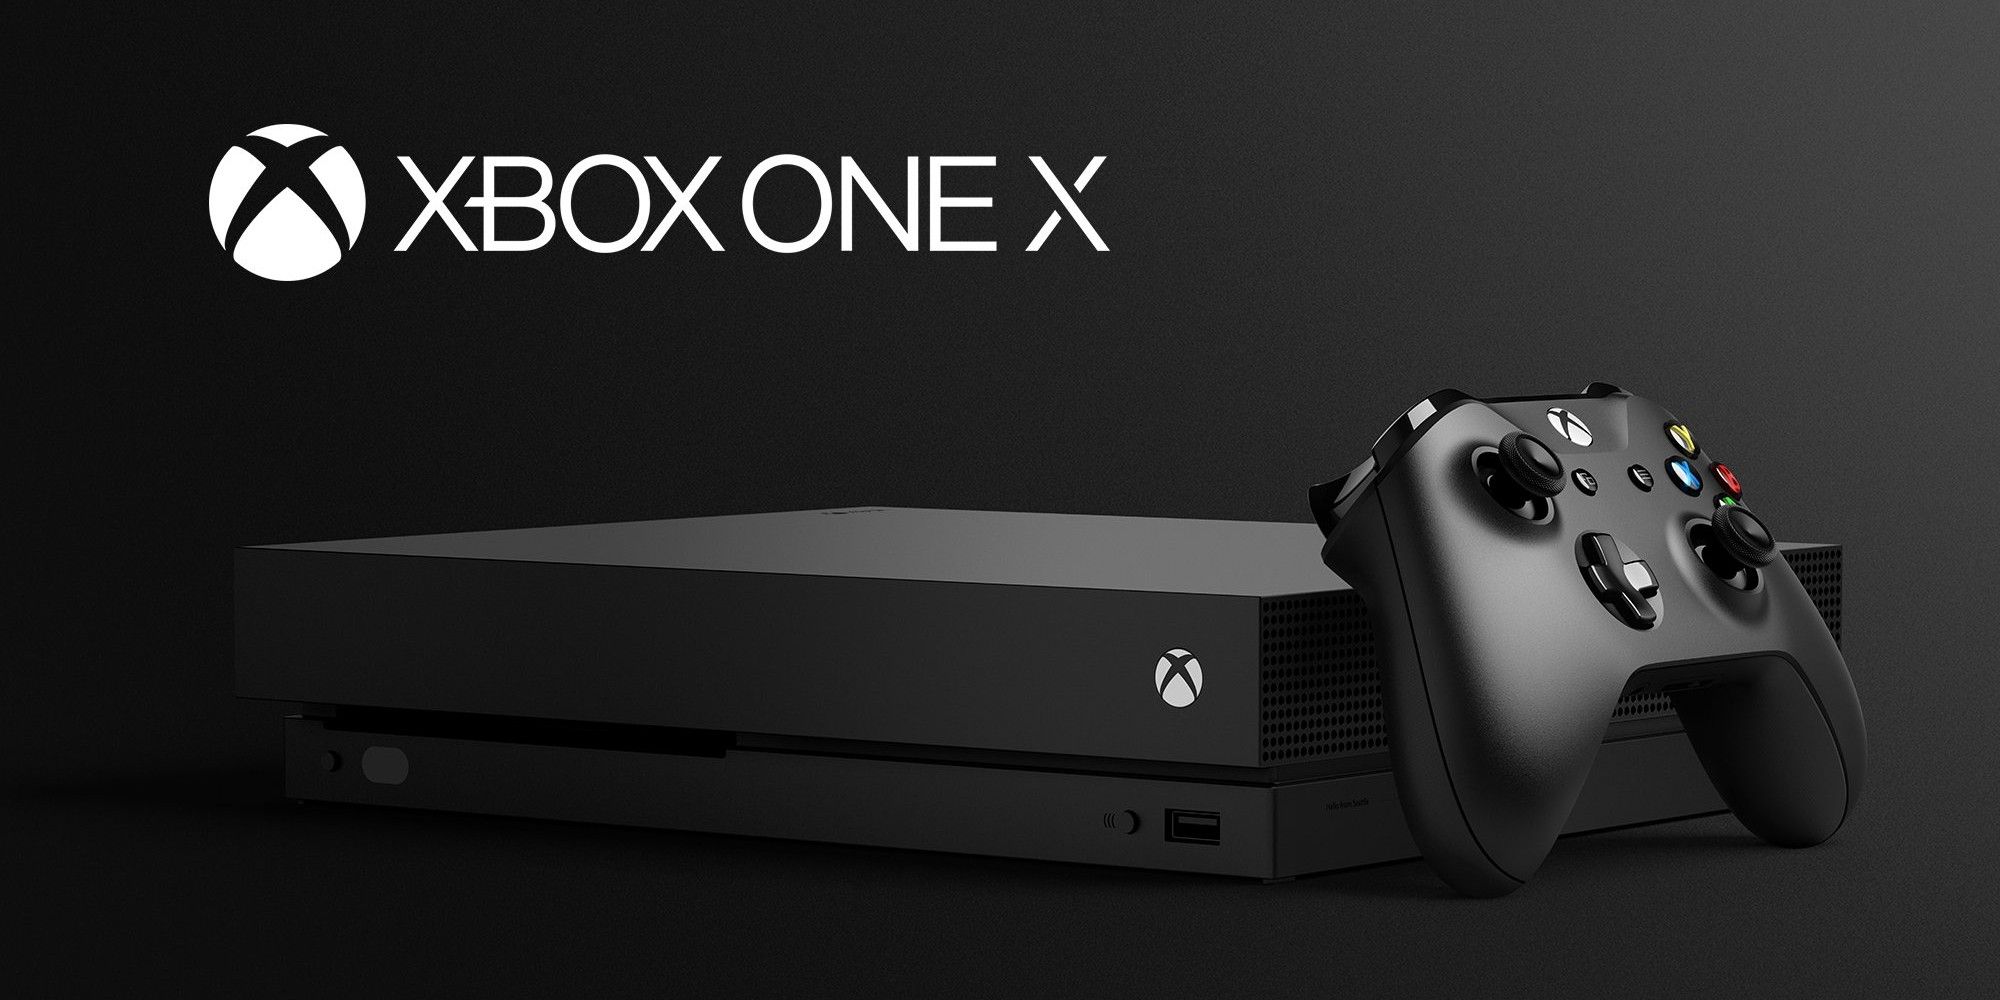 The Xbox One X with its controller